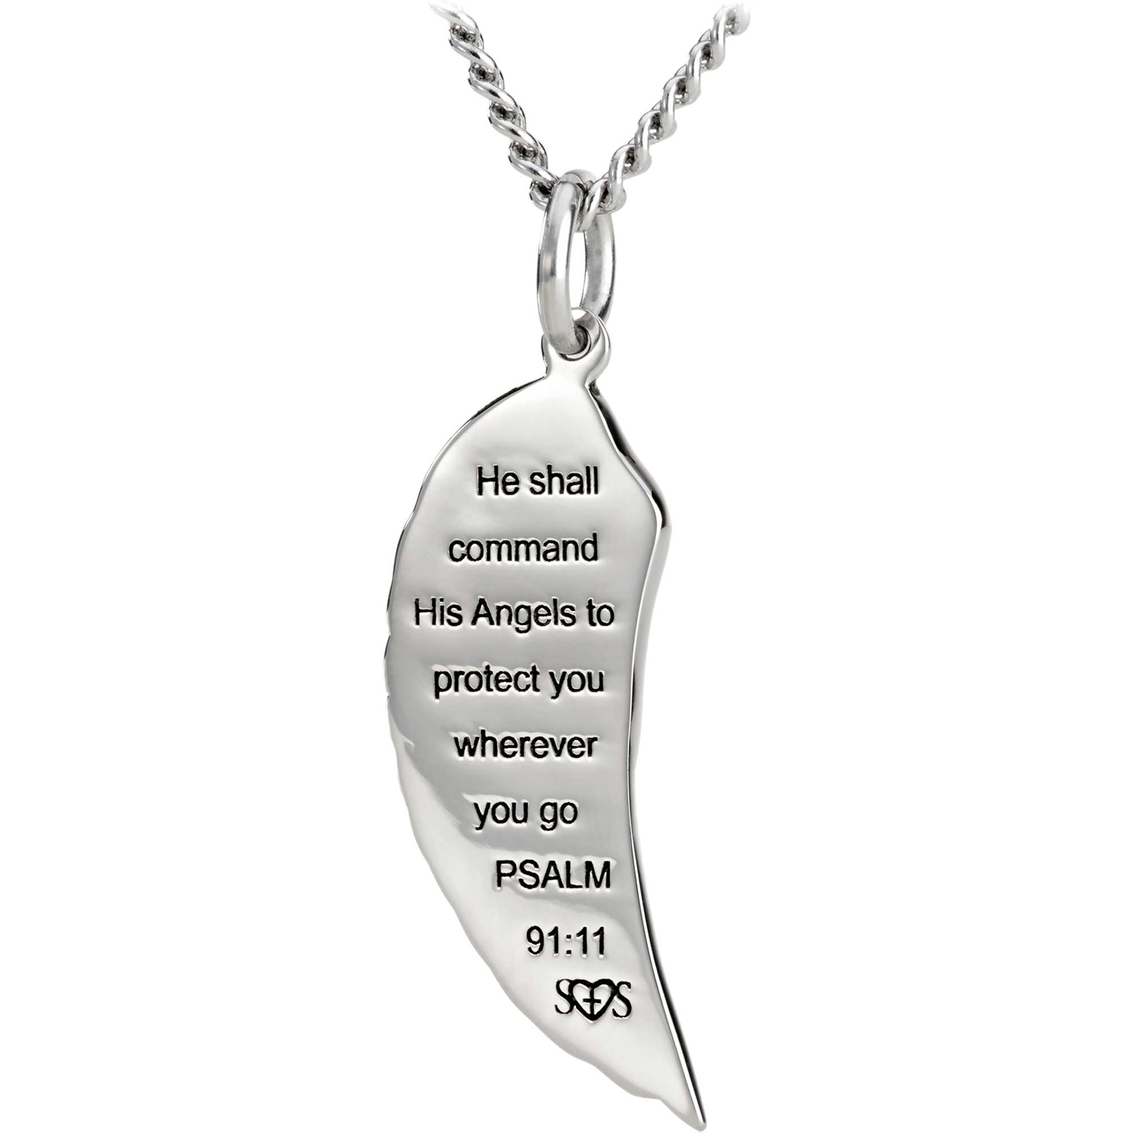 Shields of Strength Stainless Steel Mini Angel Wing Psalm 91:11 Necklace - Image 2 of 2